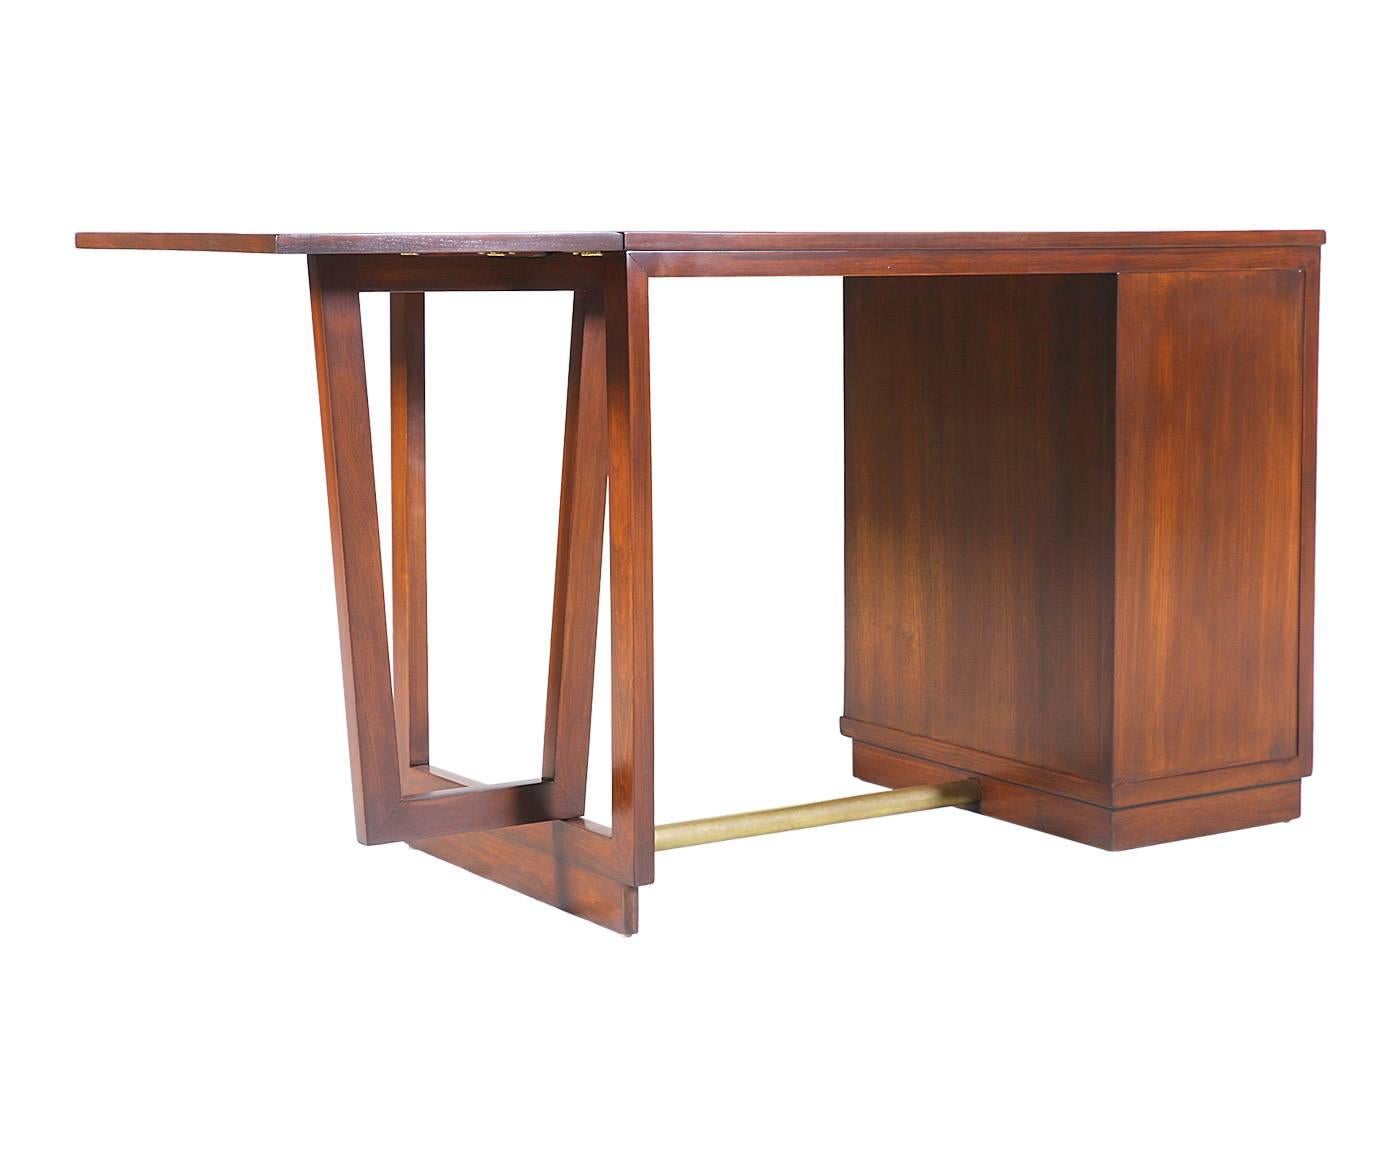 Stained Edward J. Wormley “Precedent” Writing Desk for Drexel